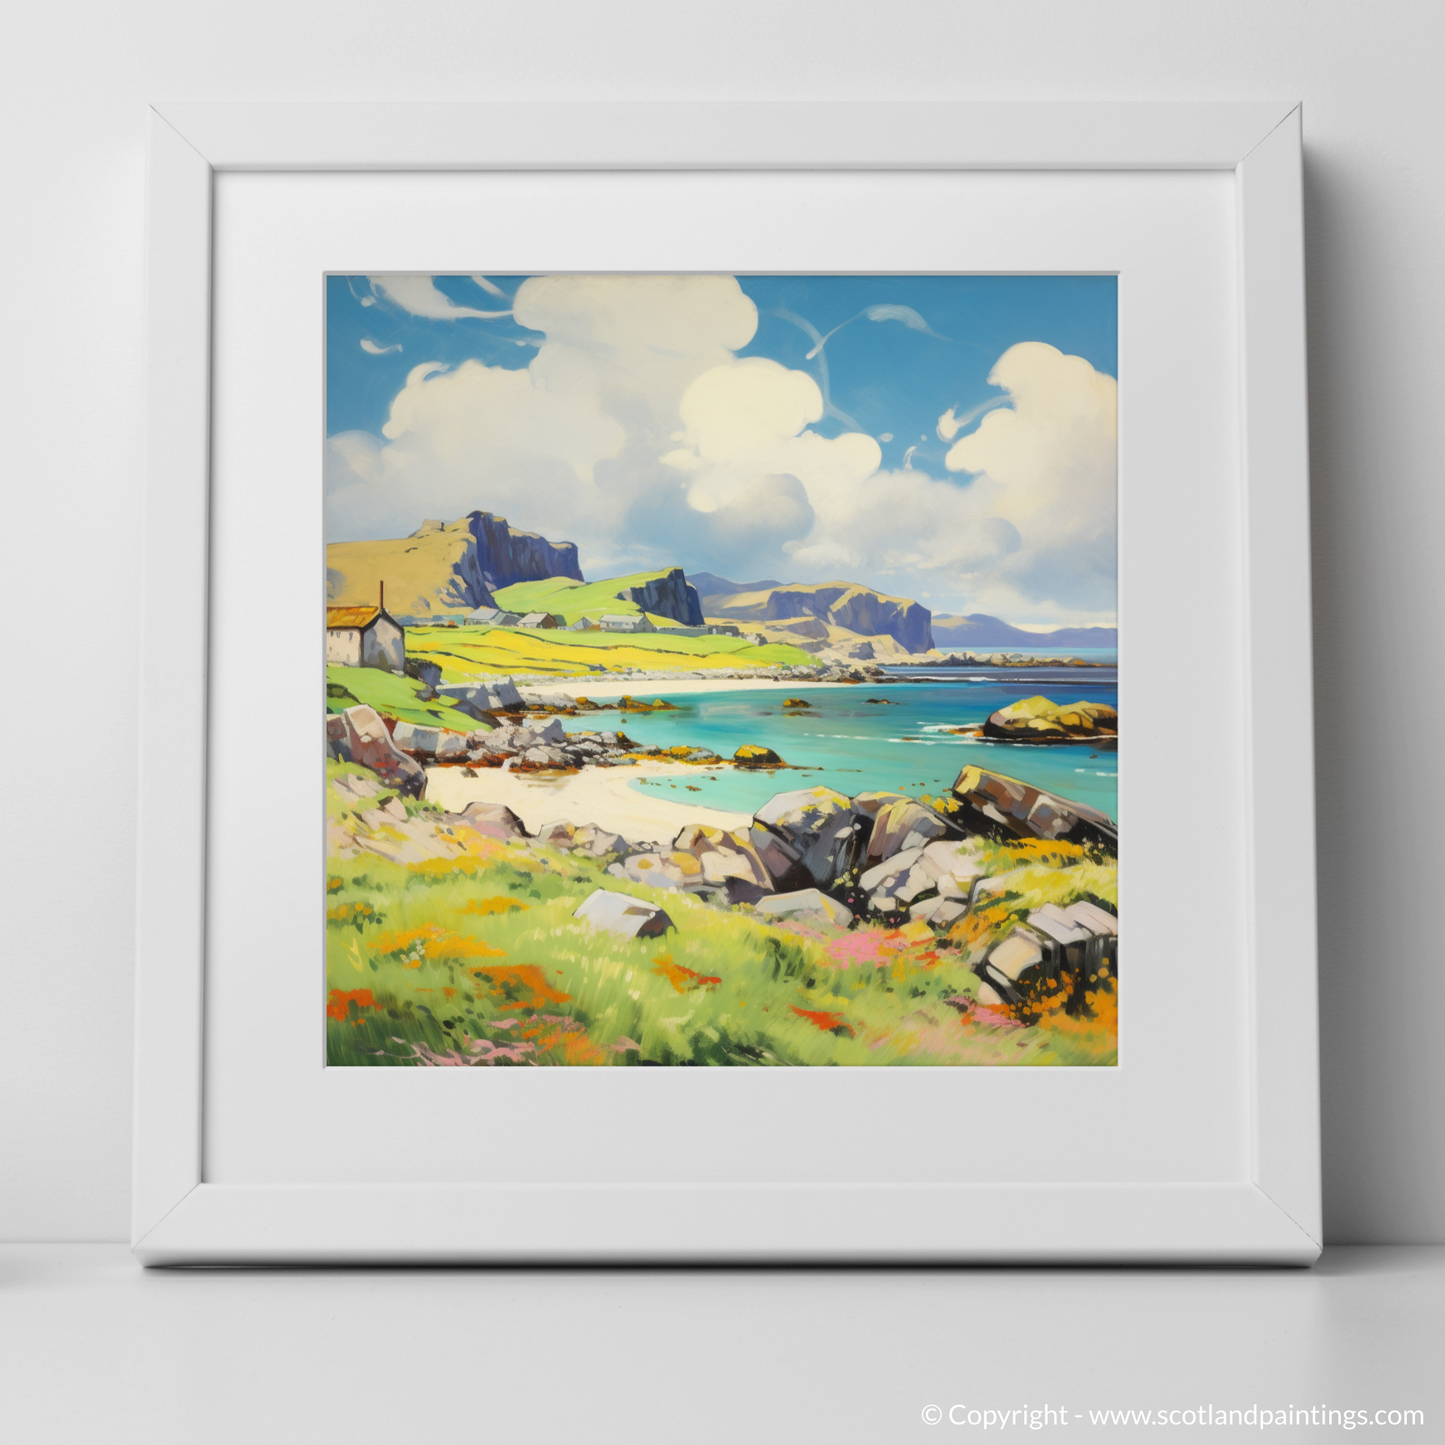 Art Print of Isle of Mull, Inner Hebrides in summer with a white frame